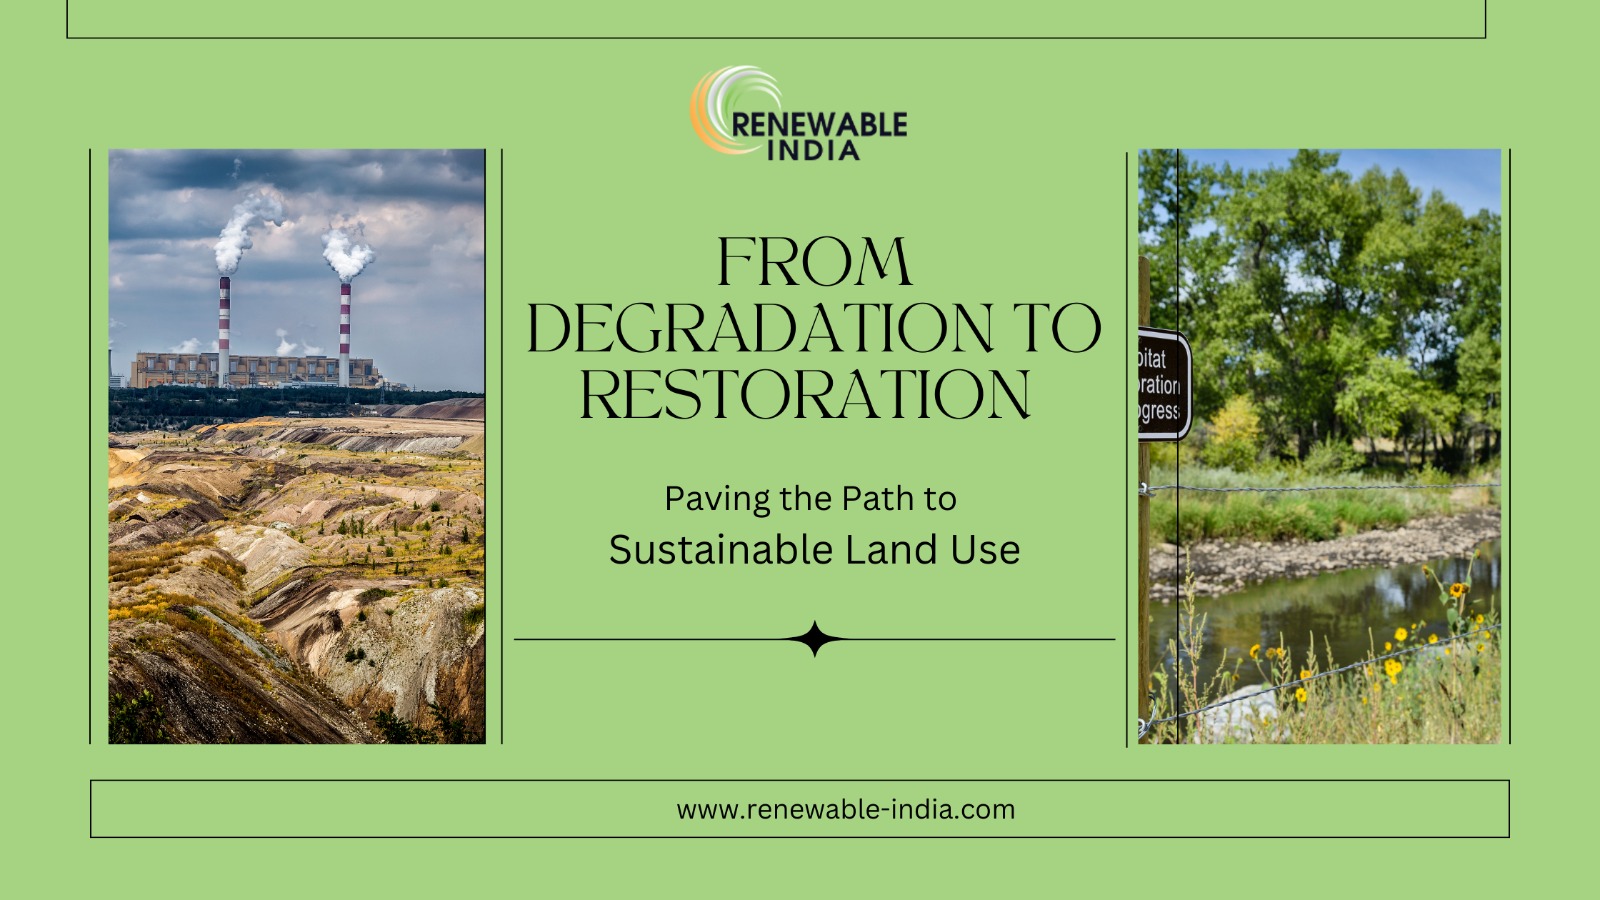 From degradation to restoration: The journey to sustainable land use